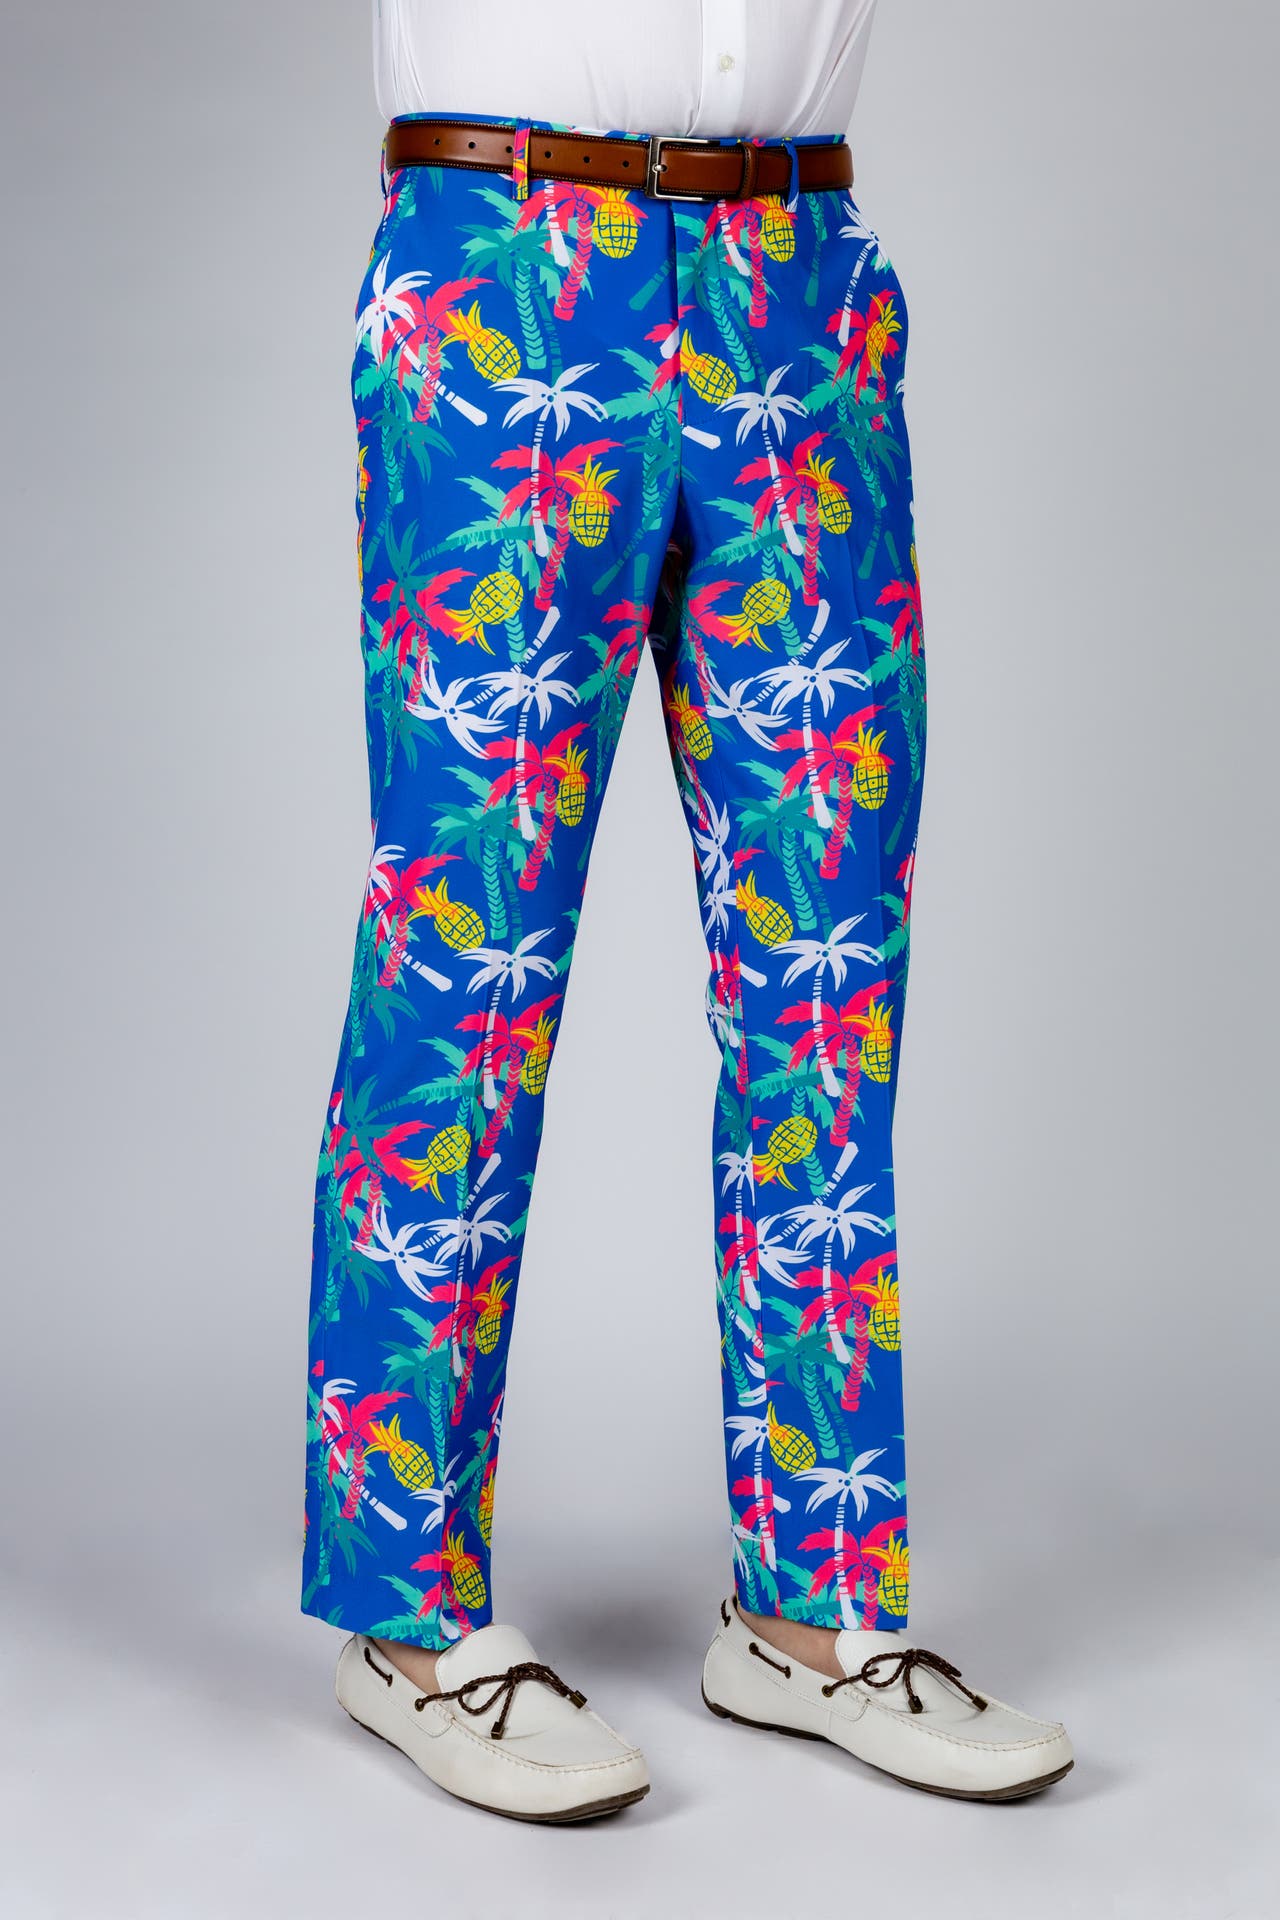 The date night tropical pants